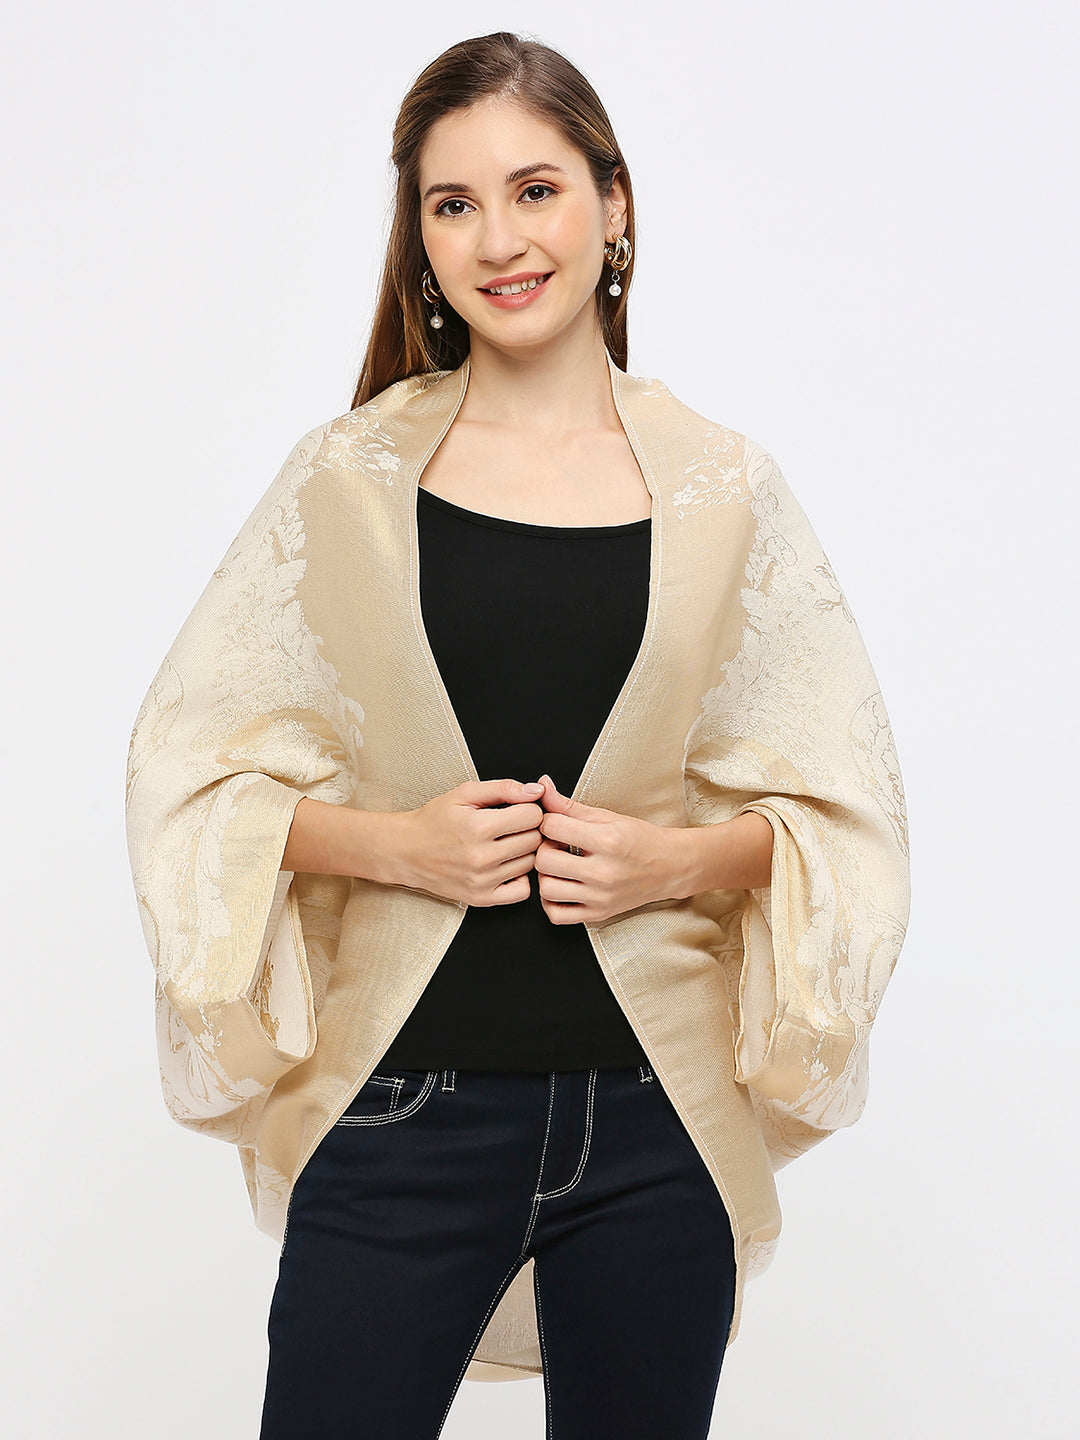 Brocade French Patterned Off-White Cape